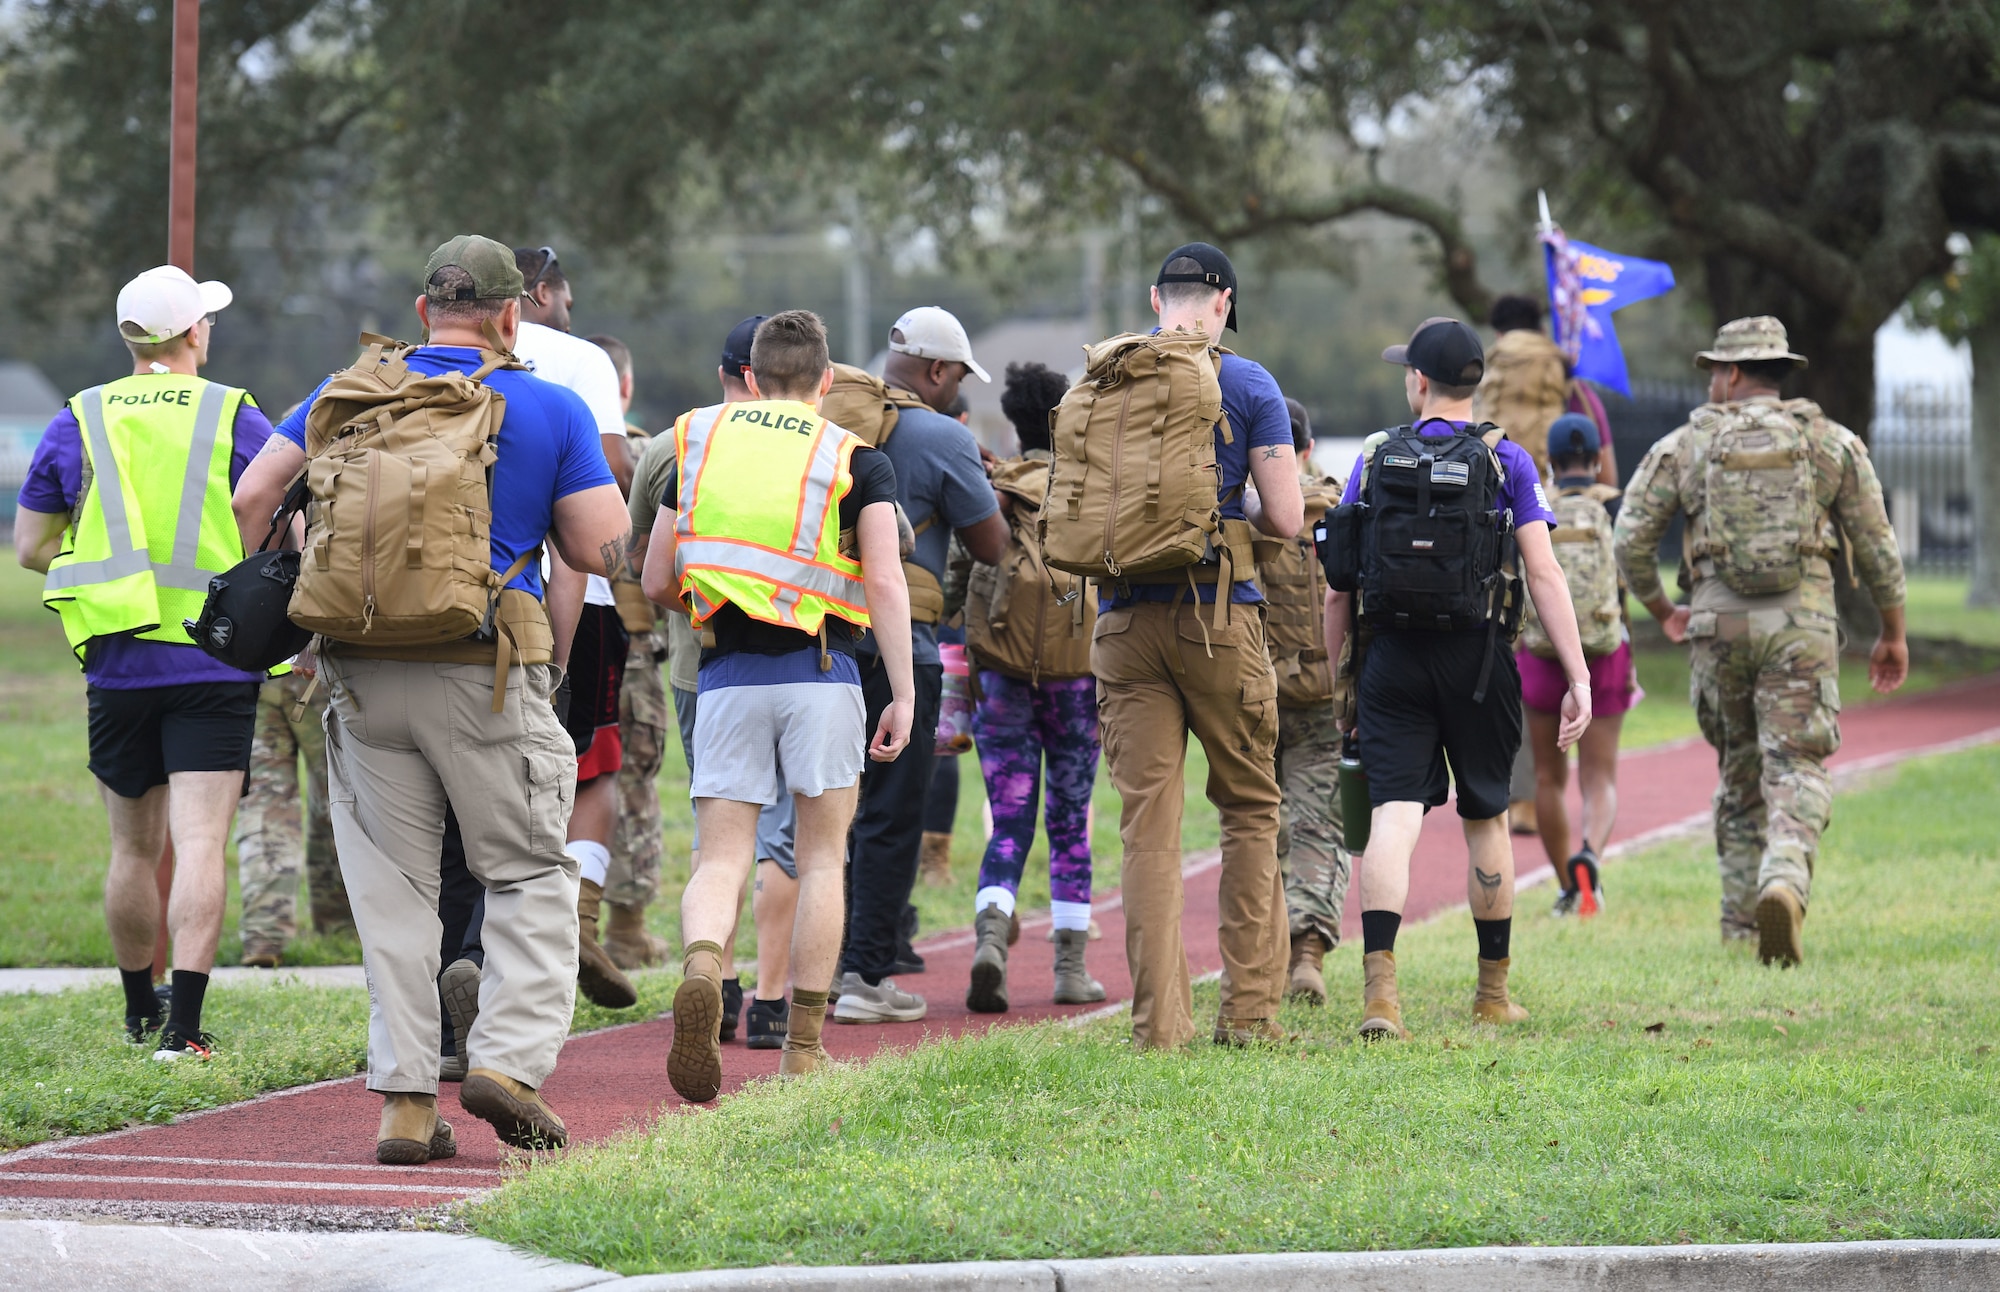 Members of the 81st Security Forces Squadron participate in the 5K Beauty and Boots Ruck March at Keesler Air Force Base, Mississippi, March 3, 2023.